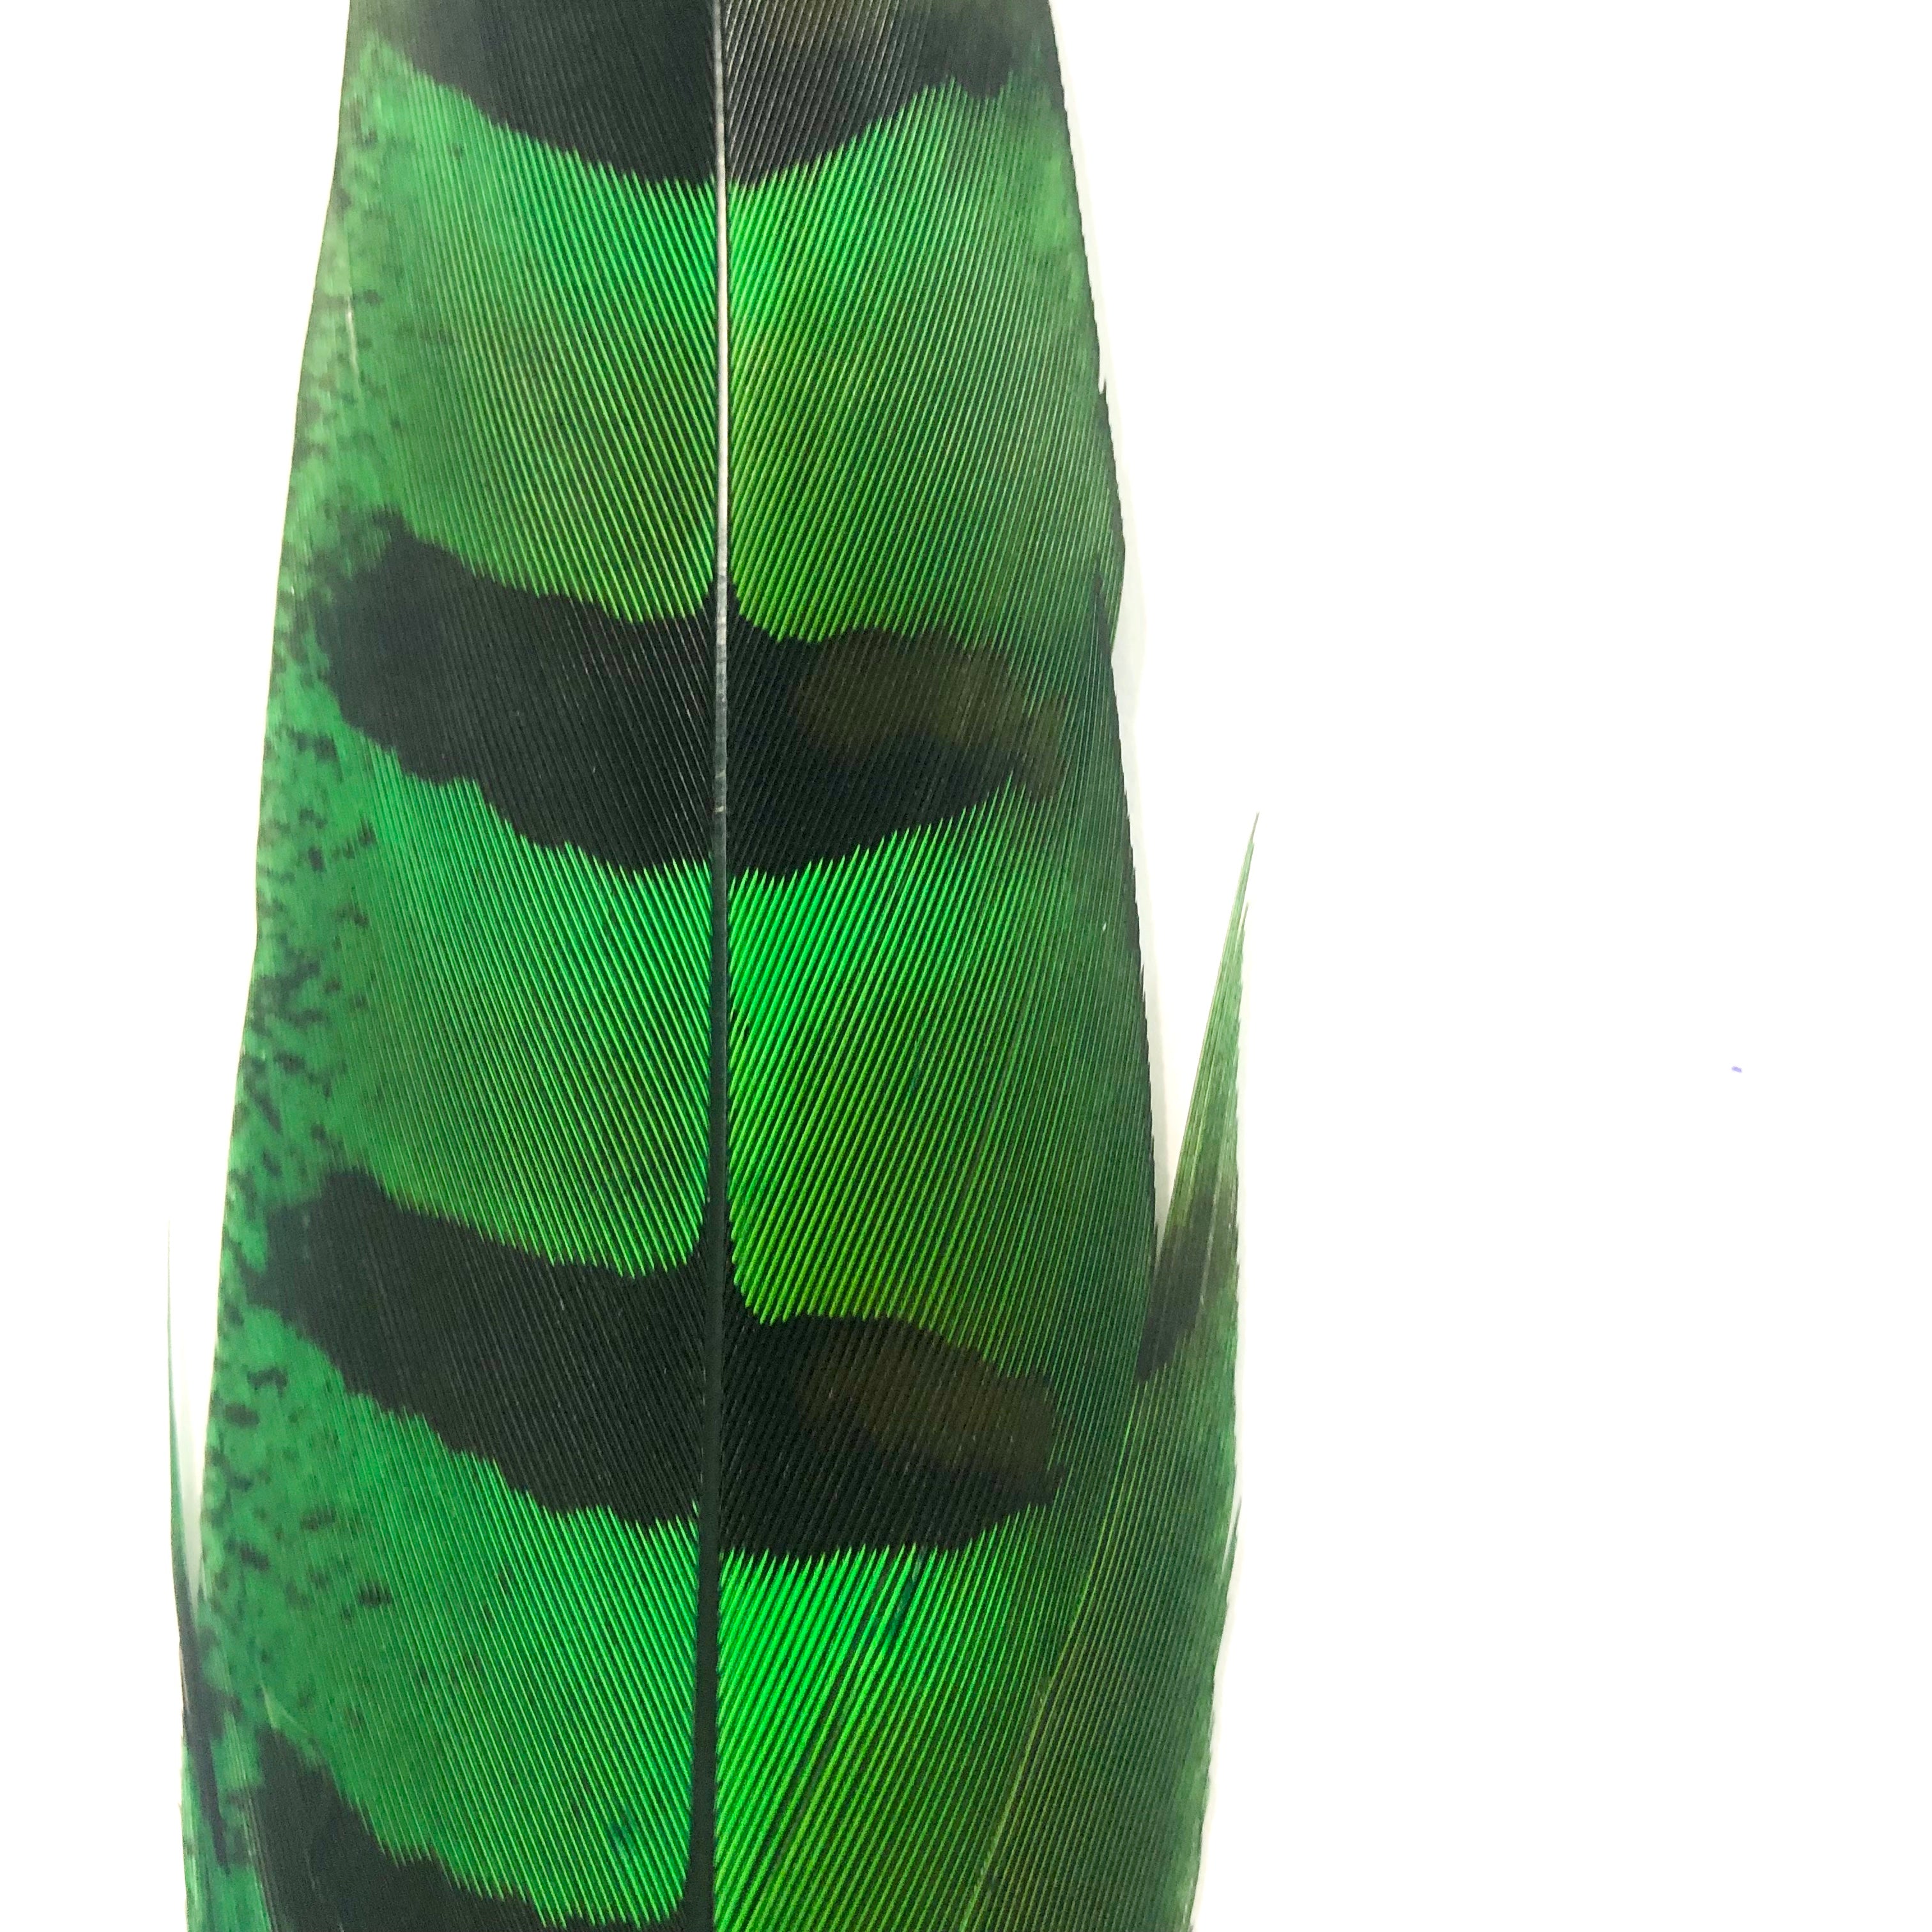 18" to 20" Reeves Pheasant Tail Feather - Green ((SECONDS))